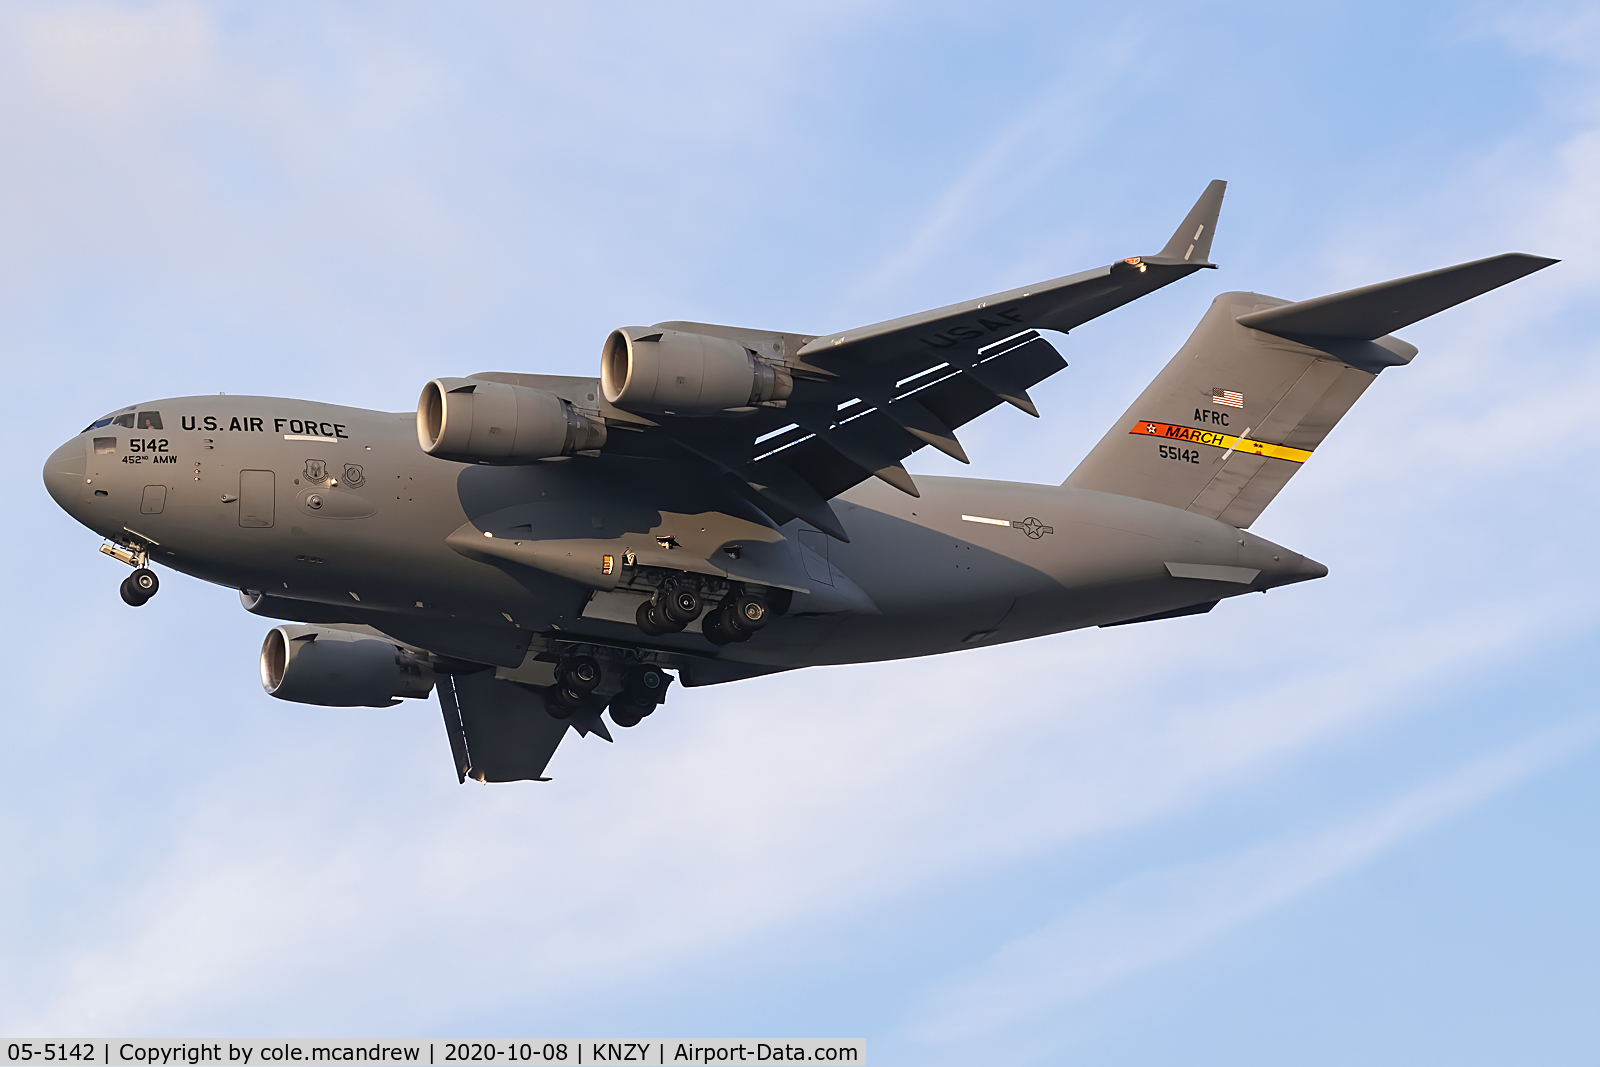 05-5142, 2005 Boeing C-17A Globemaster III C/N P-142, E55143 arriving into NAS North Island from Hickam AFB